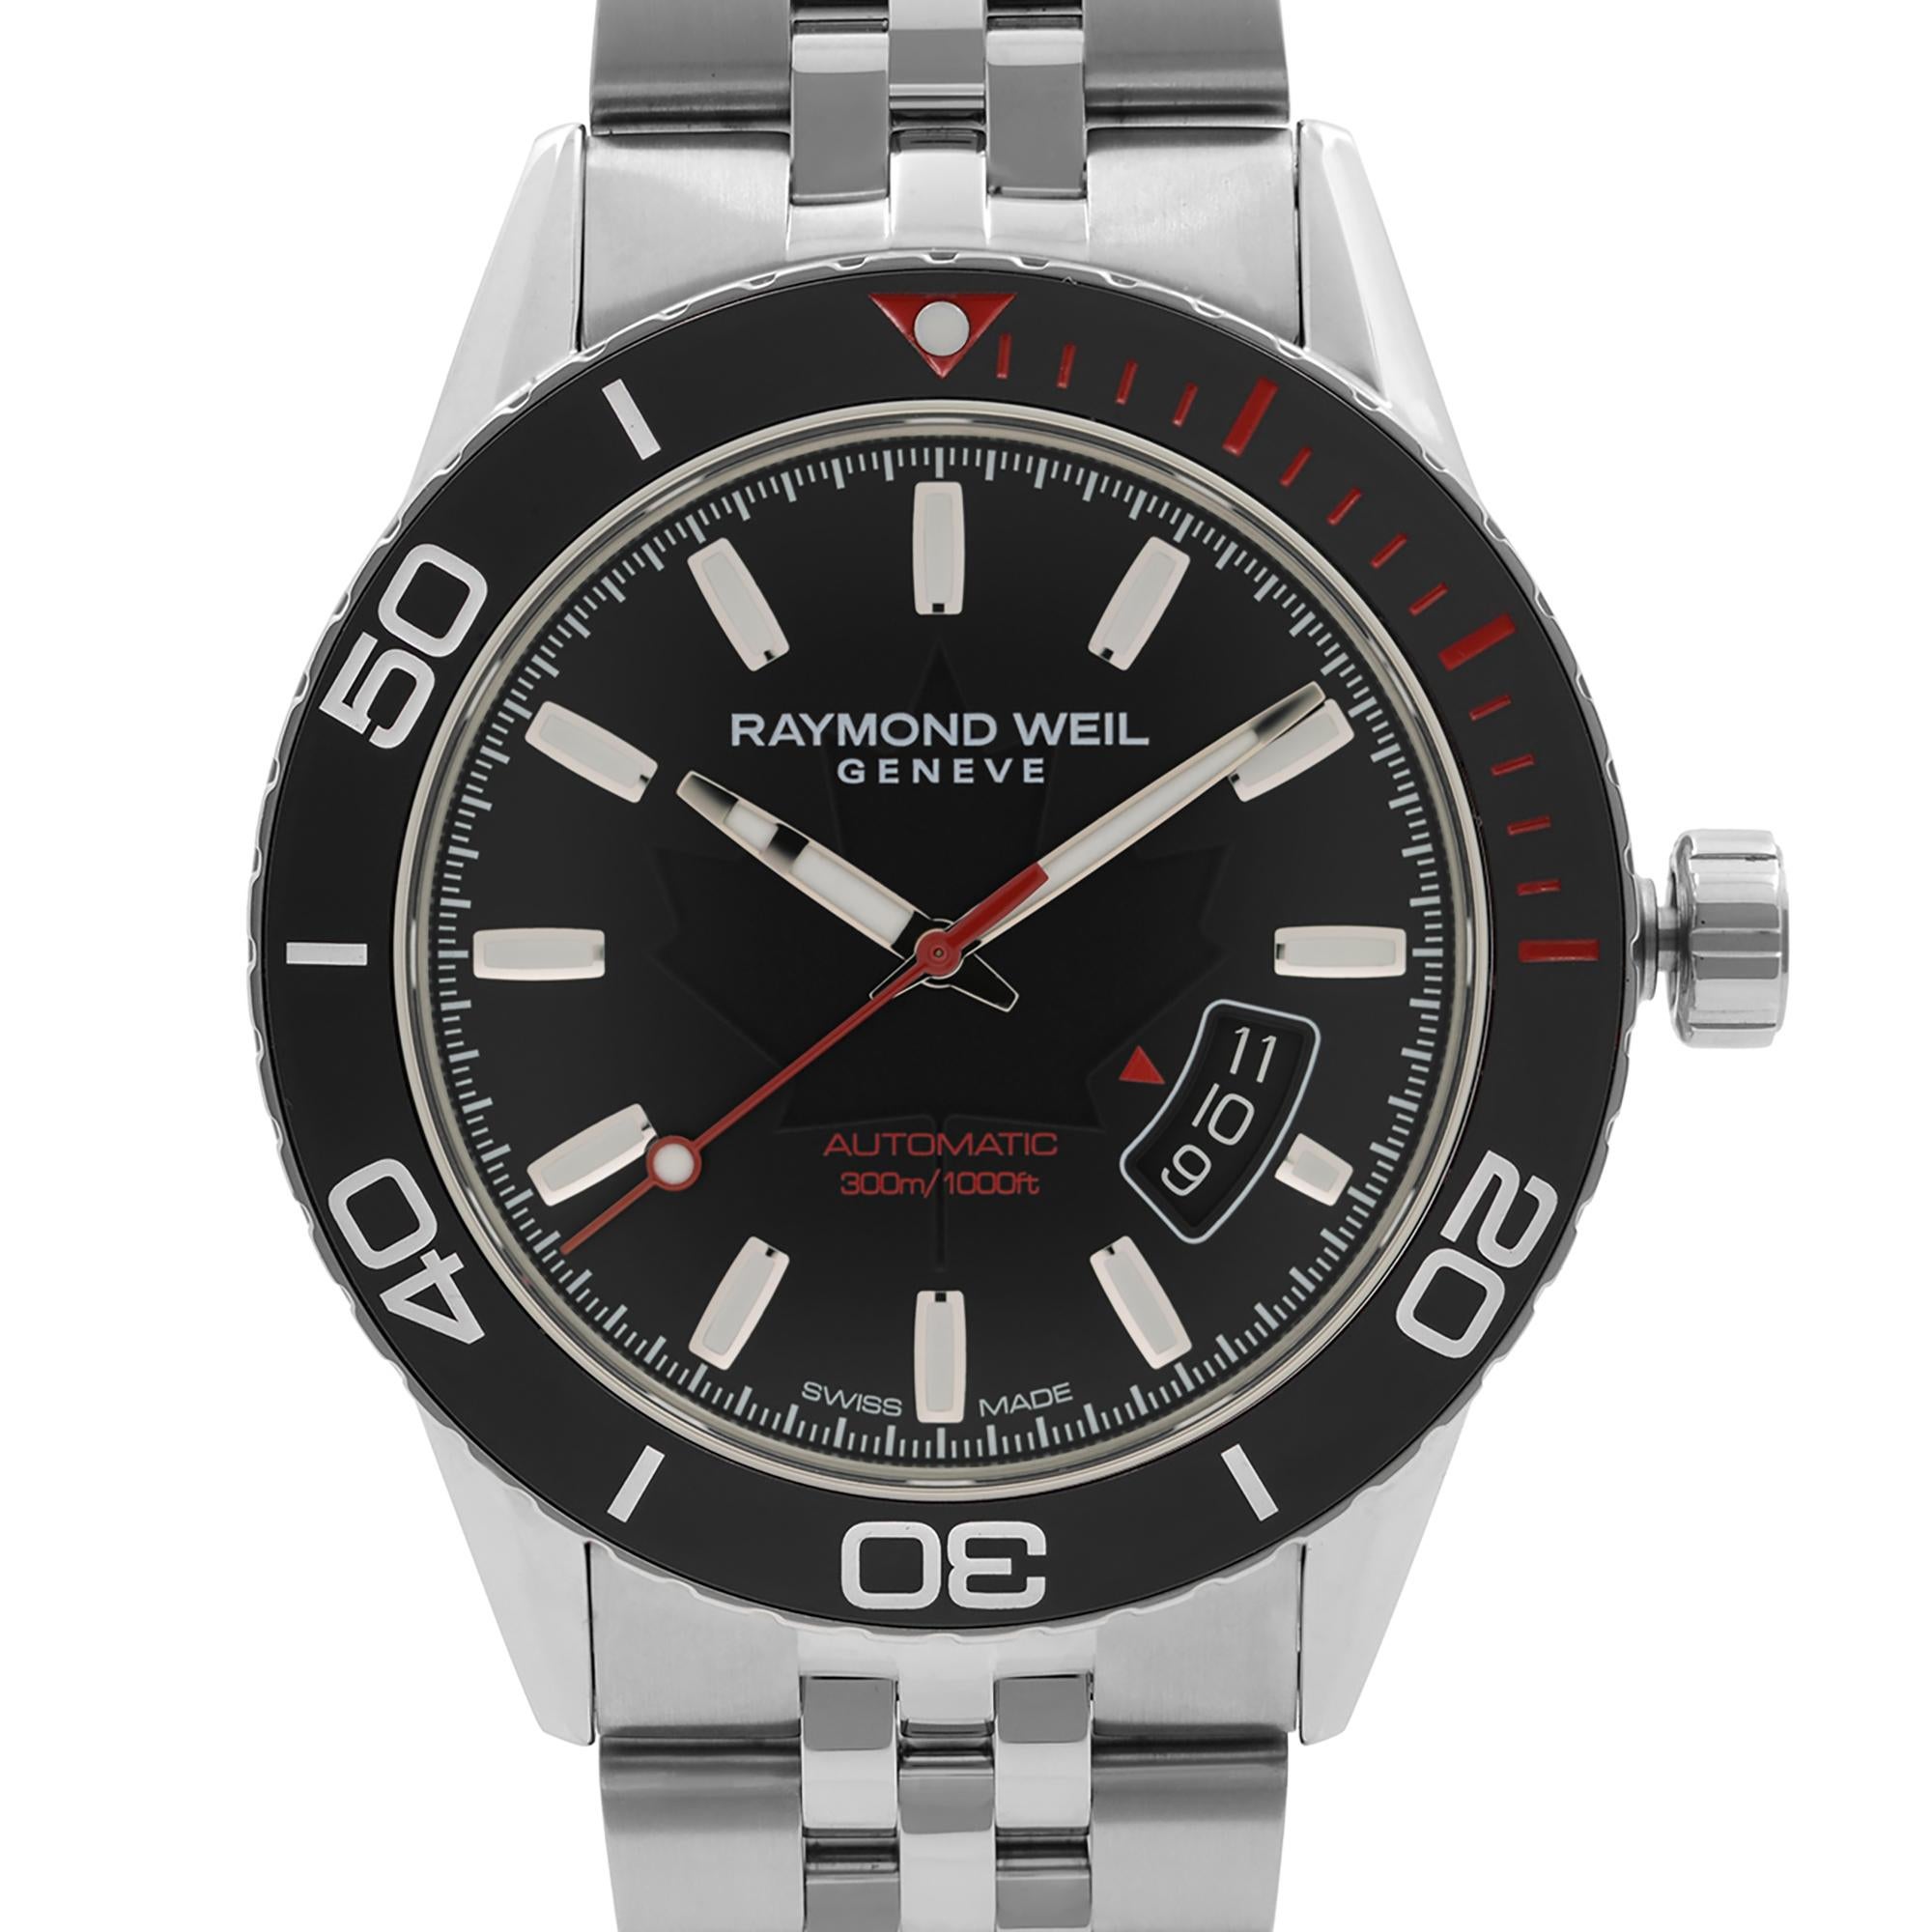 New Raymond Weil Freelancer 42mm Special Canada Edition Steel Ceramic Black Date Index Dial Automatic Men's Watch 2760-ST5-CA150. This Beautiful Timepiece Features: Stainless Steel Case and Bracelet, Uni-Directional Rotating Stainless Steel Bezel